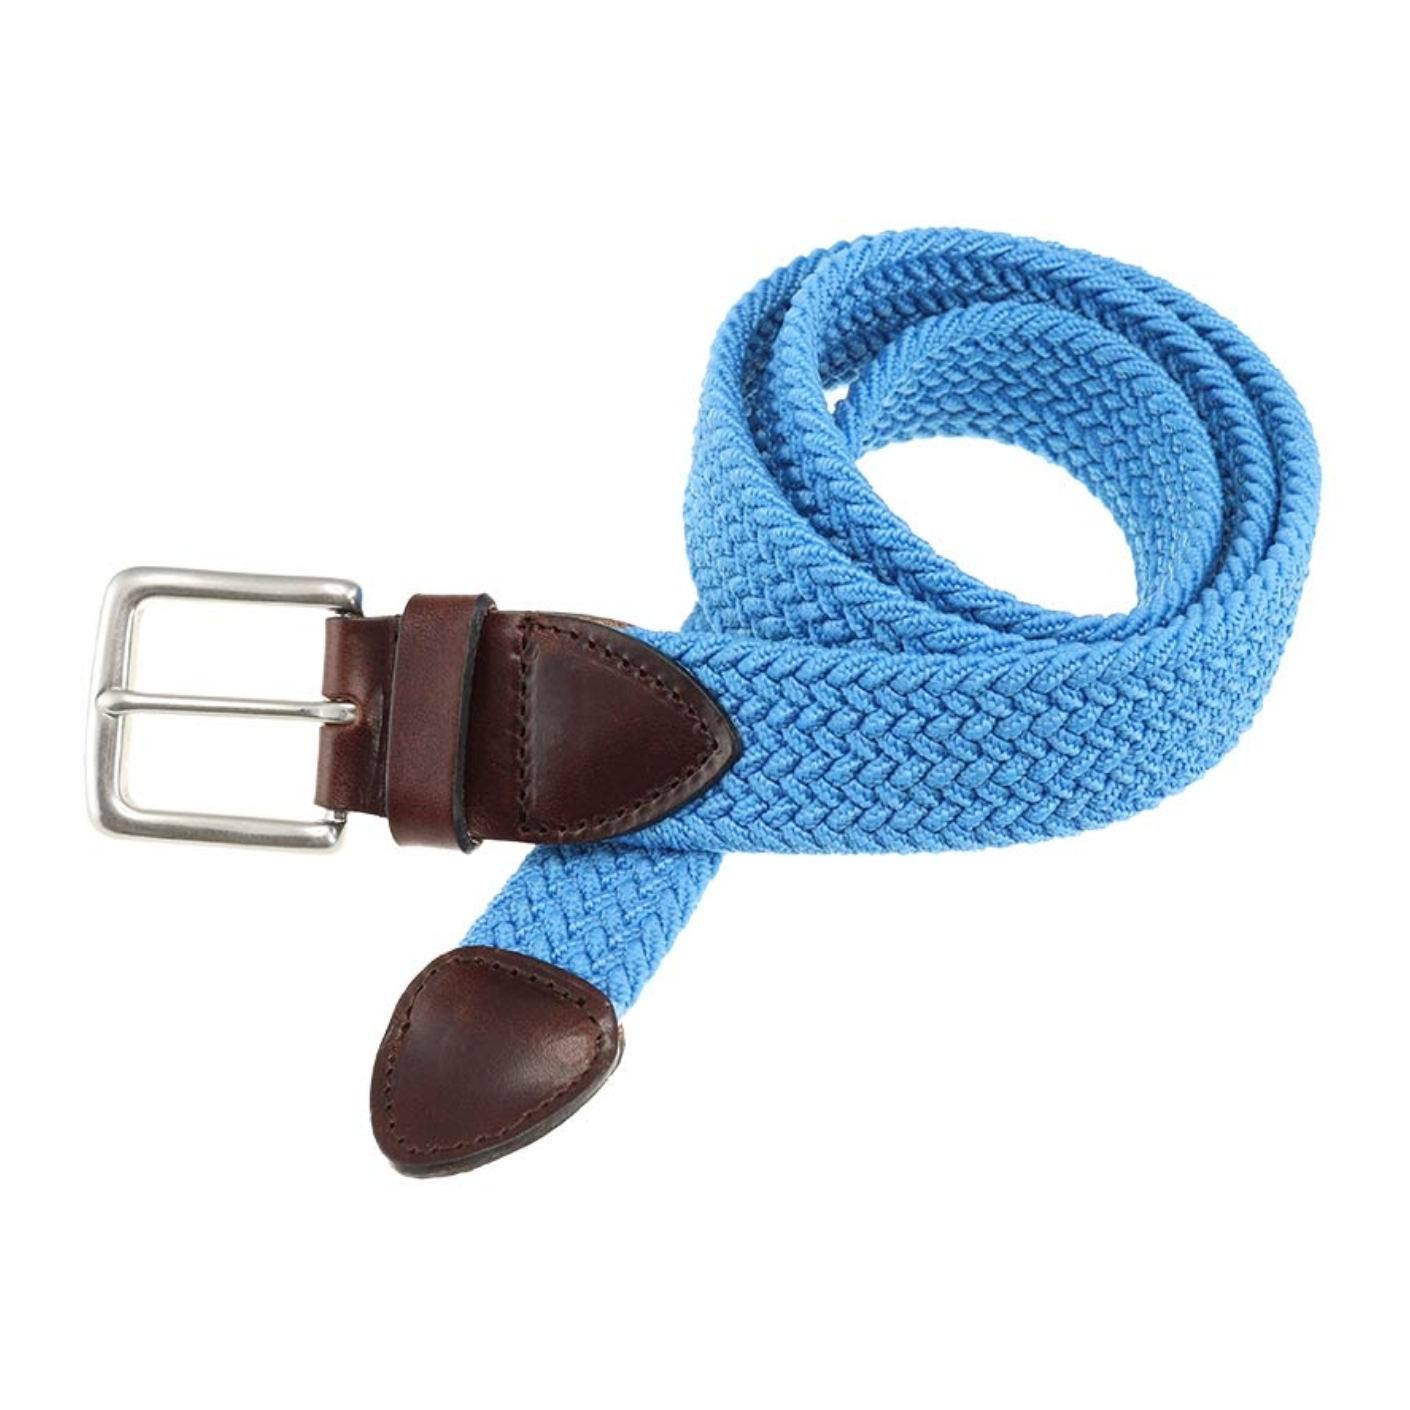 Crafted to add a rich style to any look, our Haspel x T.B. Phelps Collaboration, the Blue Braided Belt features a Briar Waxy leather tab, antique nickel finish buckle, and four color choices of braided elastic.   Braided elastic  •  Briar Waxy Leather Points  •  1-3/8" wide  •  Antique Nickel Finish Buckle  •  Available in Blue, White, Navy or Black  •  Imported  •  Always order belts one size above your natural waist size.  •  Return Policy